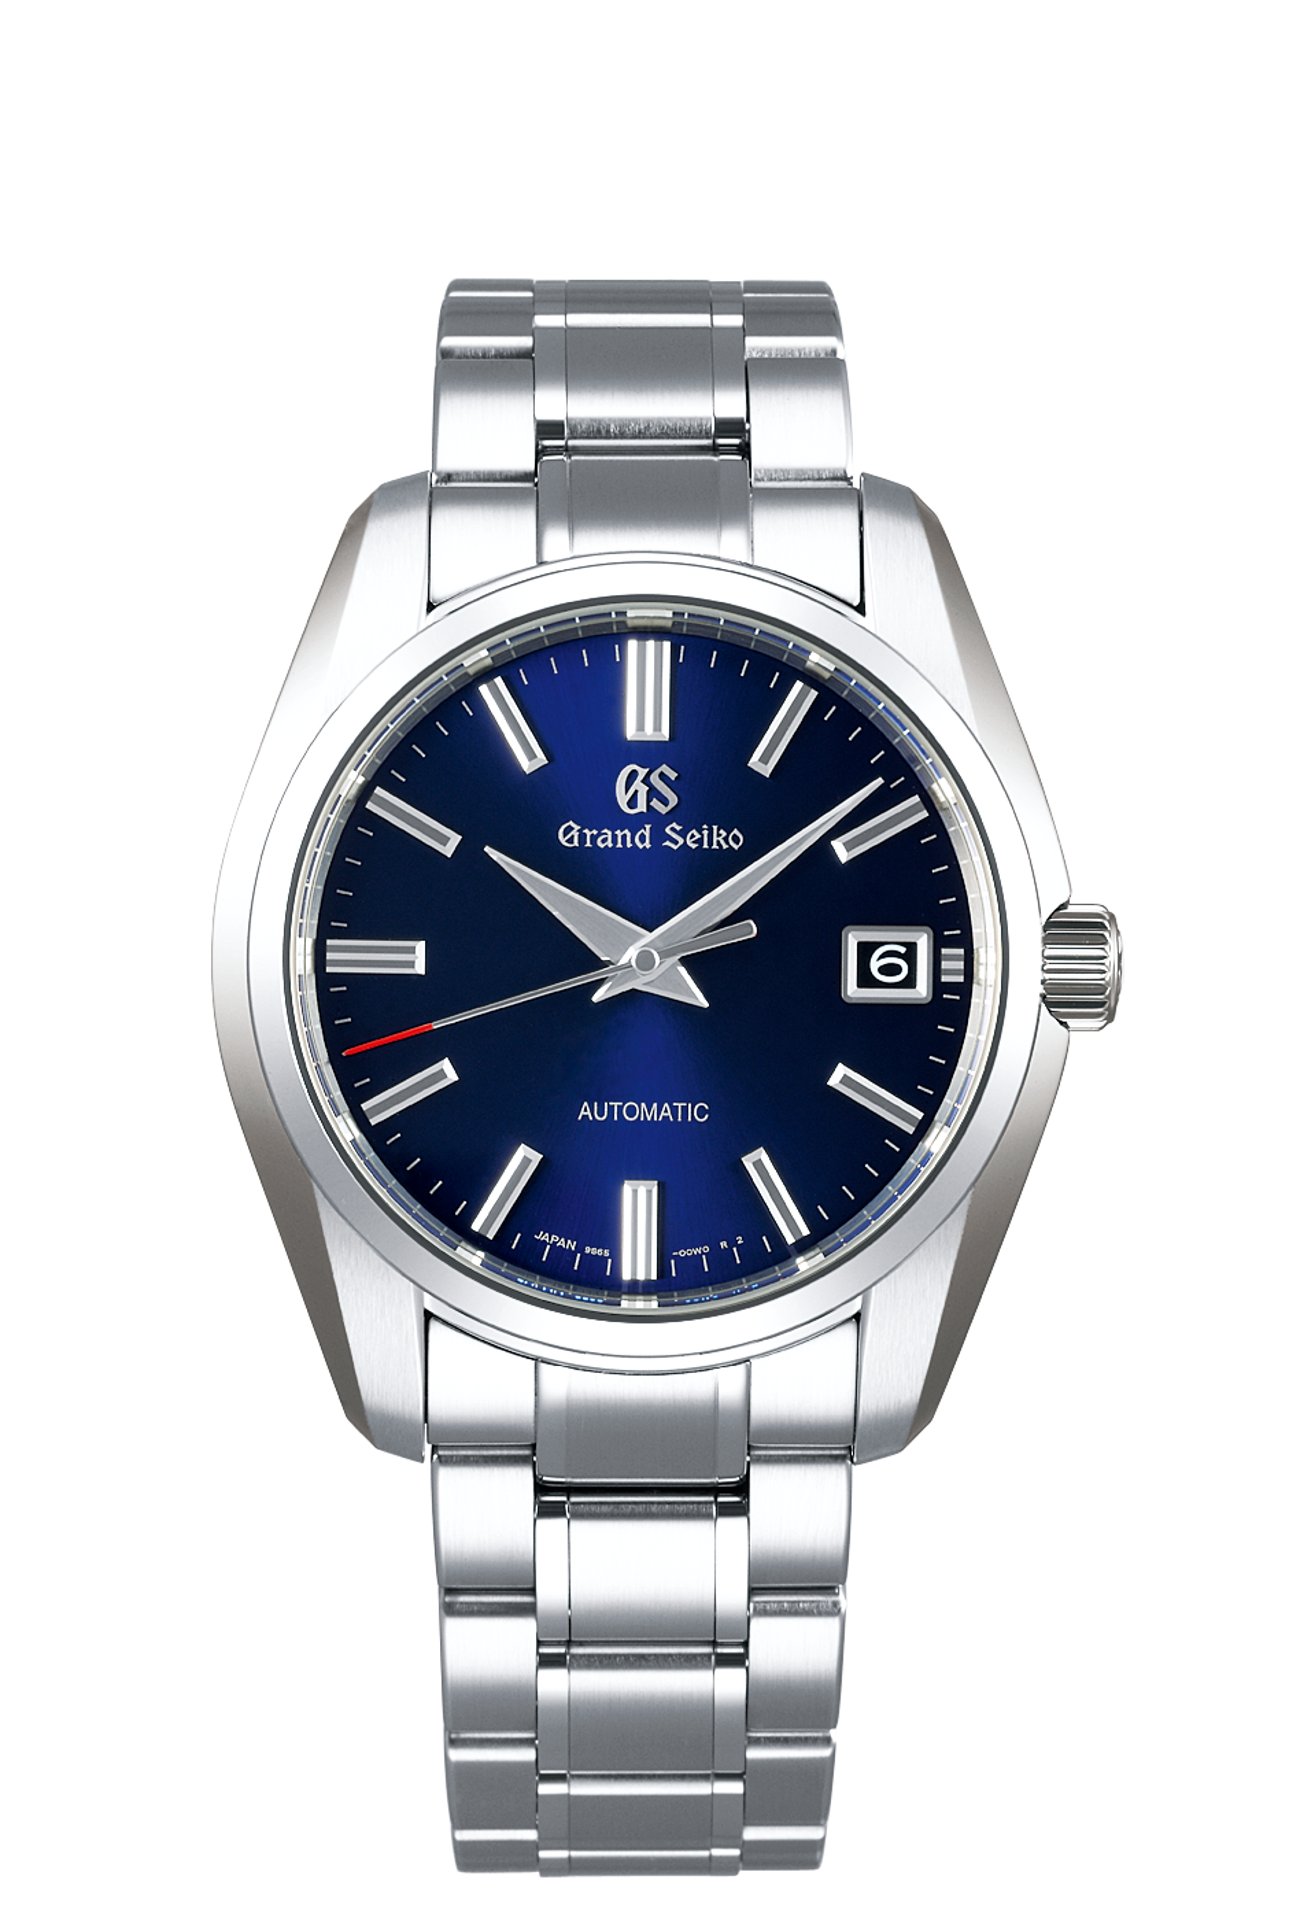 Grand Seiko celebrates a new dawn with a design inspired by the early  morning sun - Grand Seiko 60th Anniversary Limited Edition SBGR321 - Watch  I Love